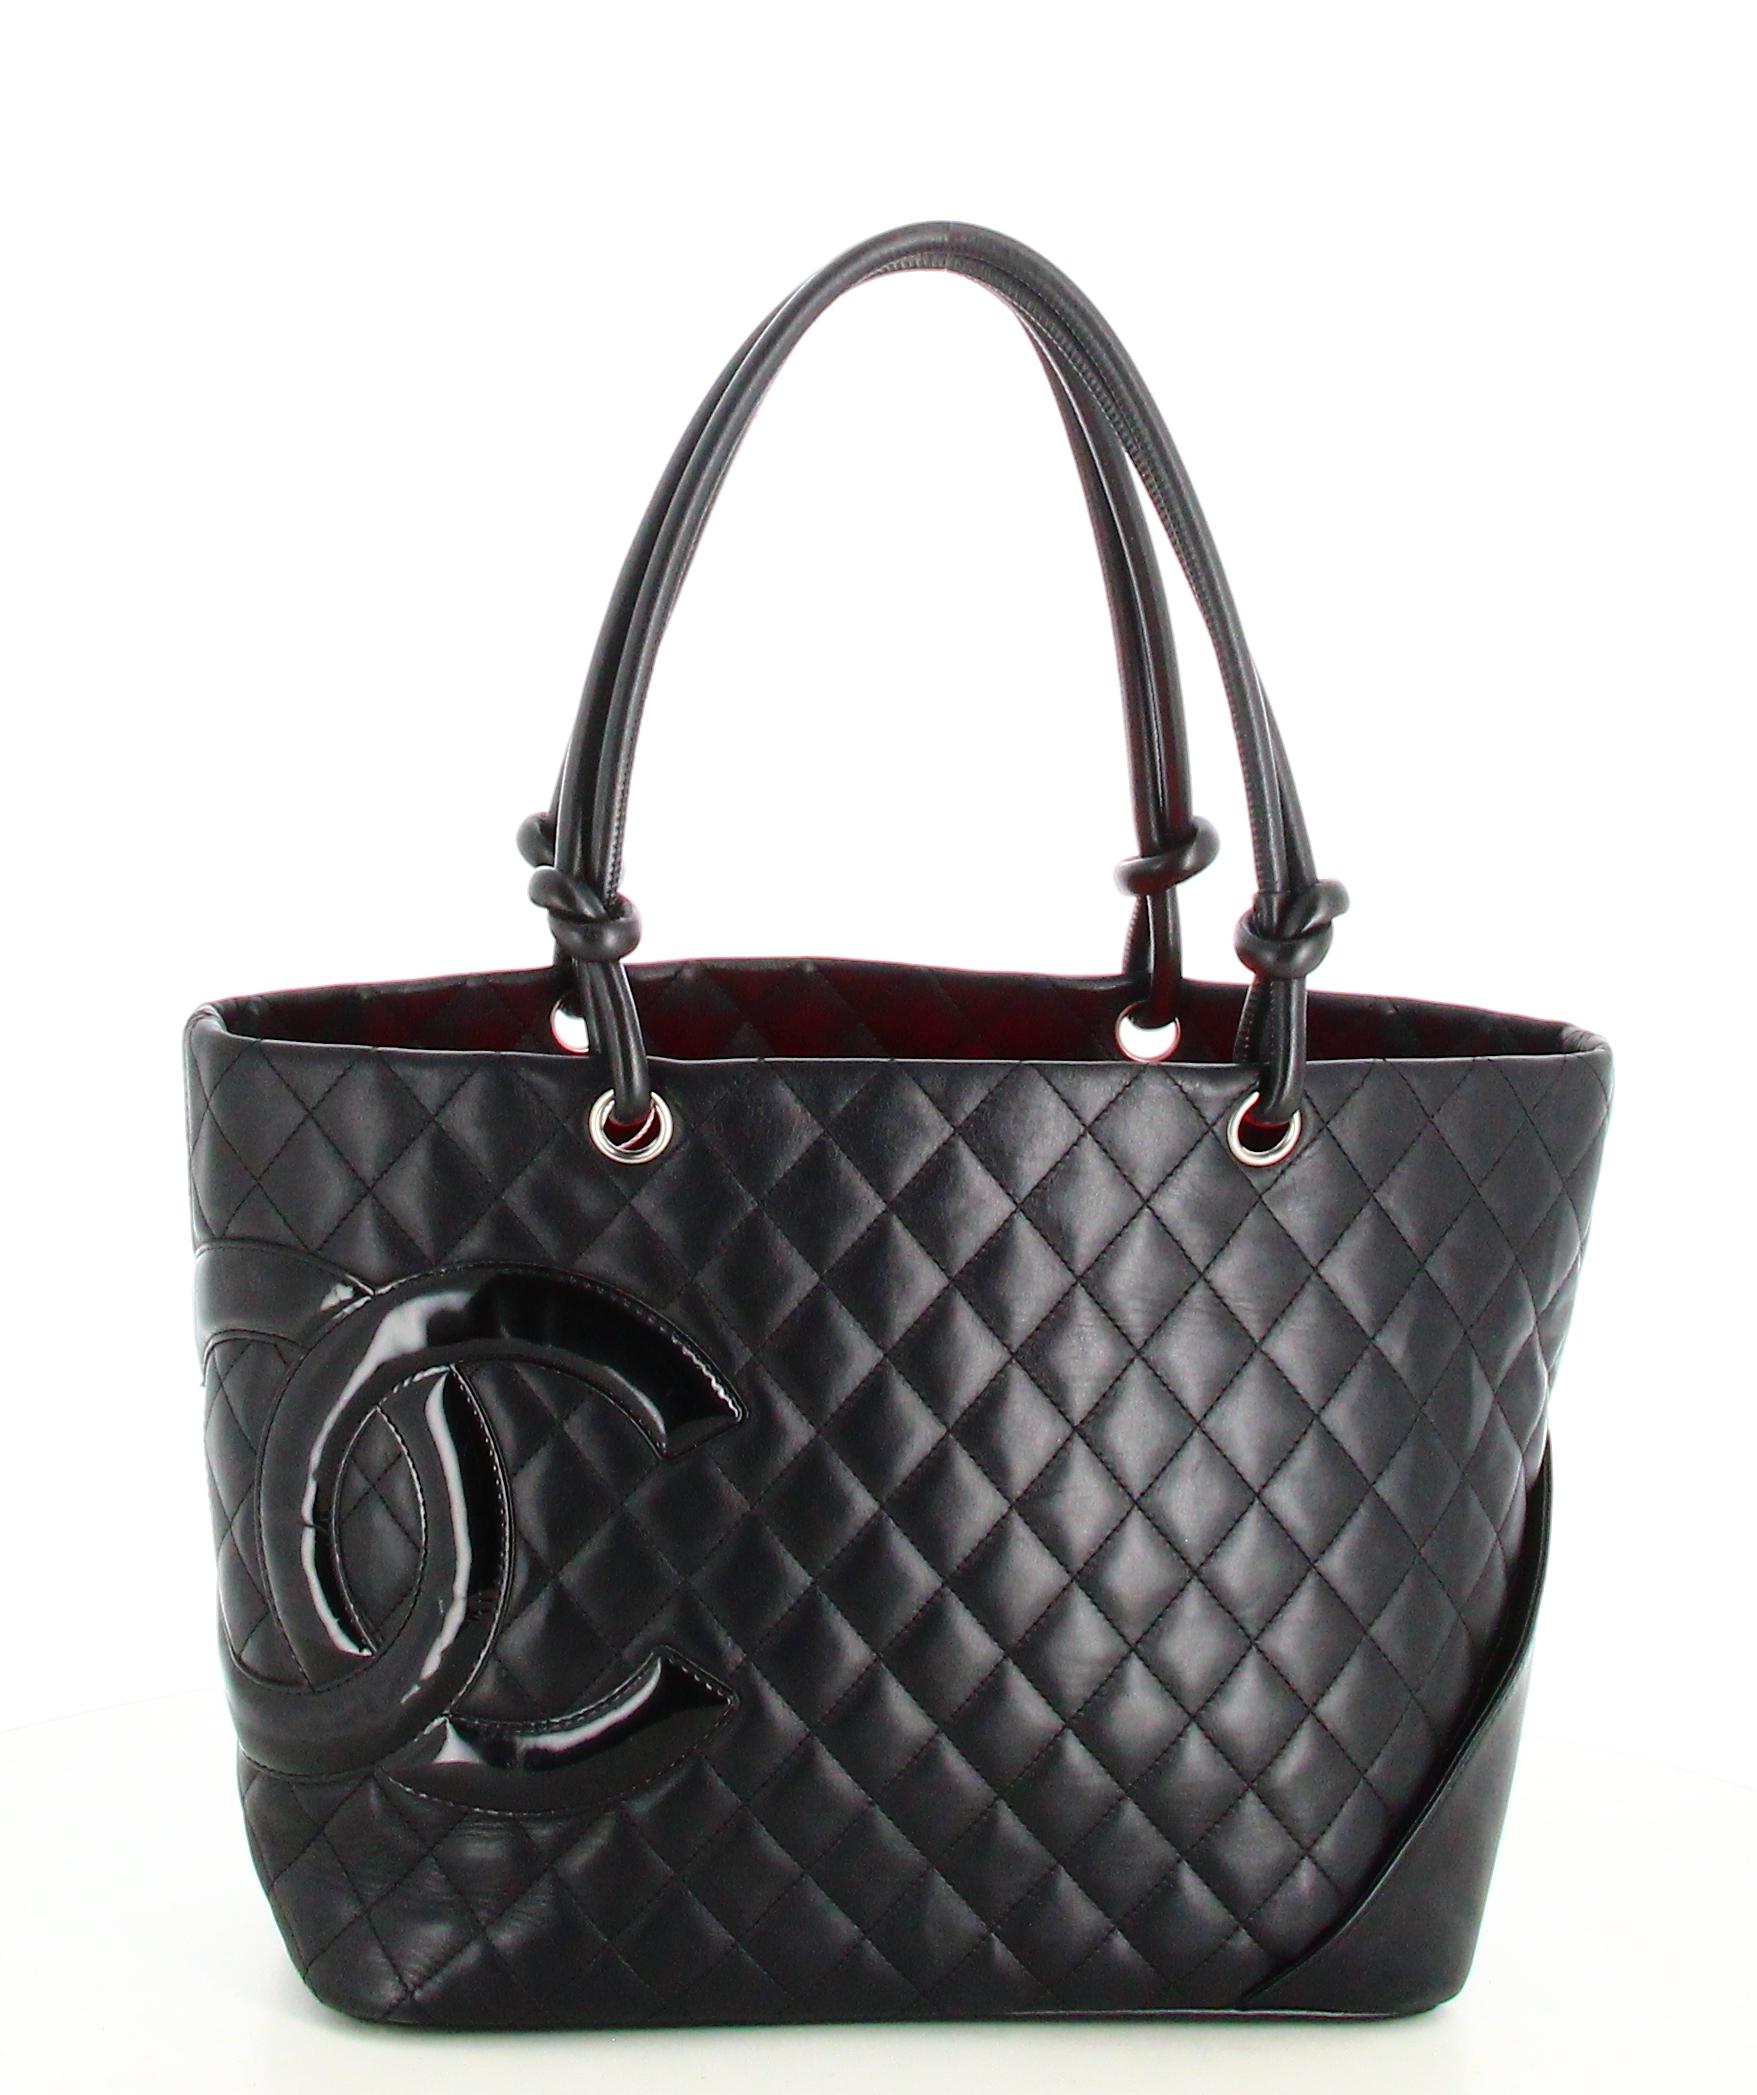 Chanel Handbag Black Leather Large Quilted Cambon Tote Line

- Good condition. Shows very slight signs of wear over time.
- Chanel Handbag
- Black quilted leather
- Two black leather handles
- Inside: pink monogram lining plus inside pocket